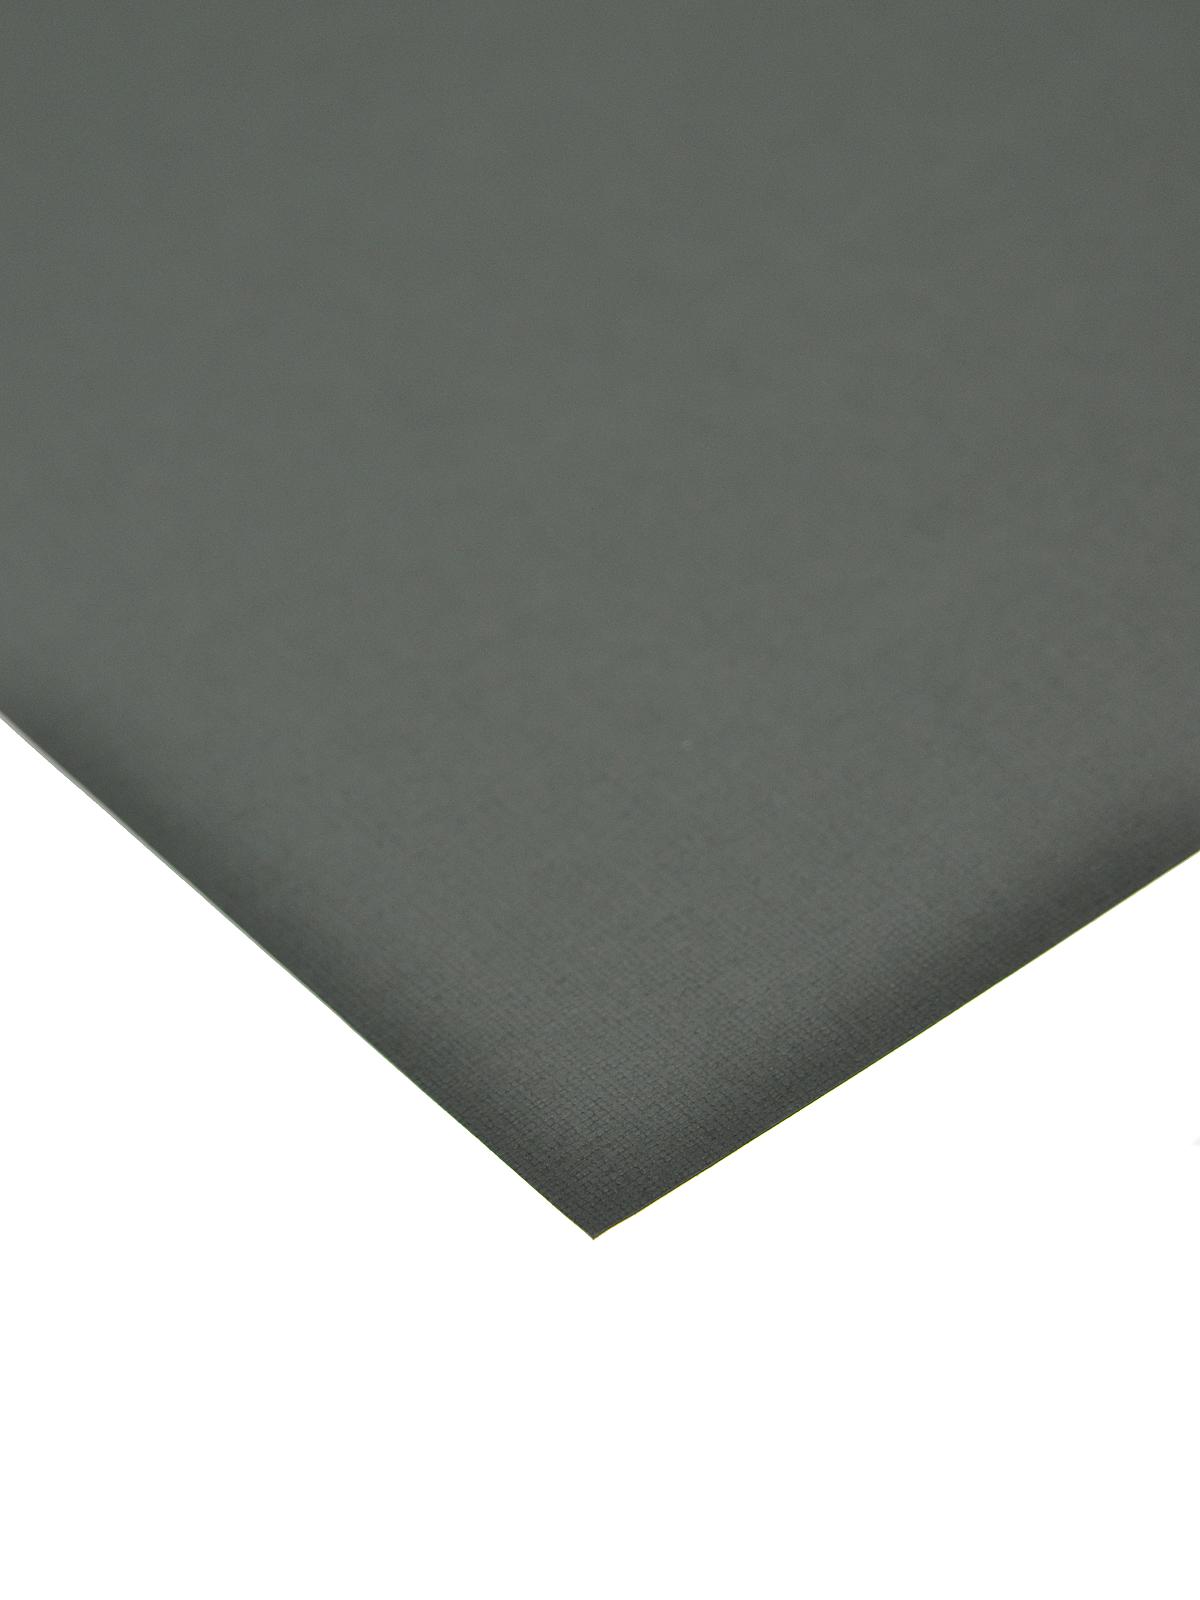 80 Lb. Canvas 8.5 In. X 11 In. Sheet Charcoal